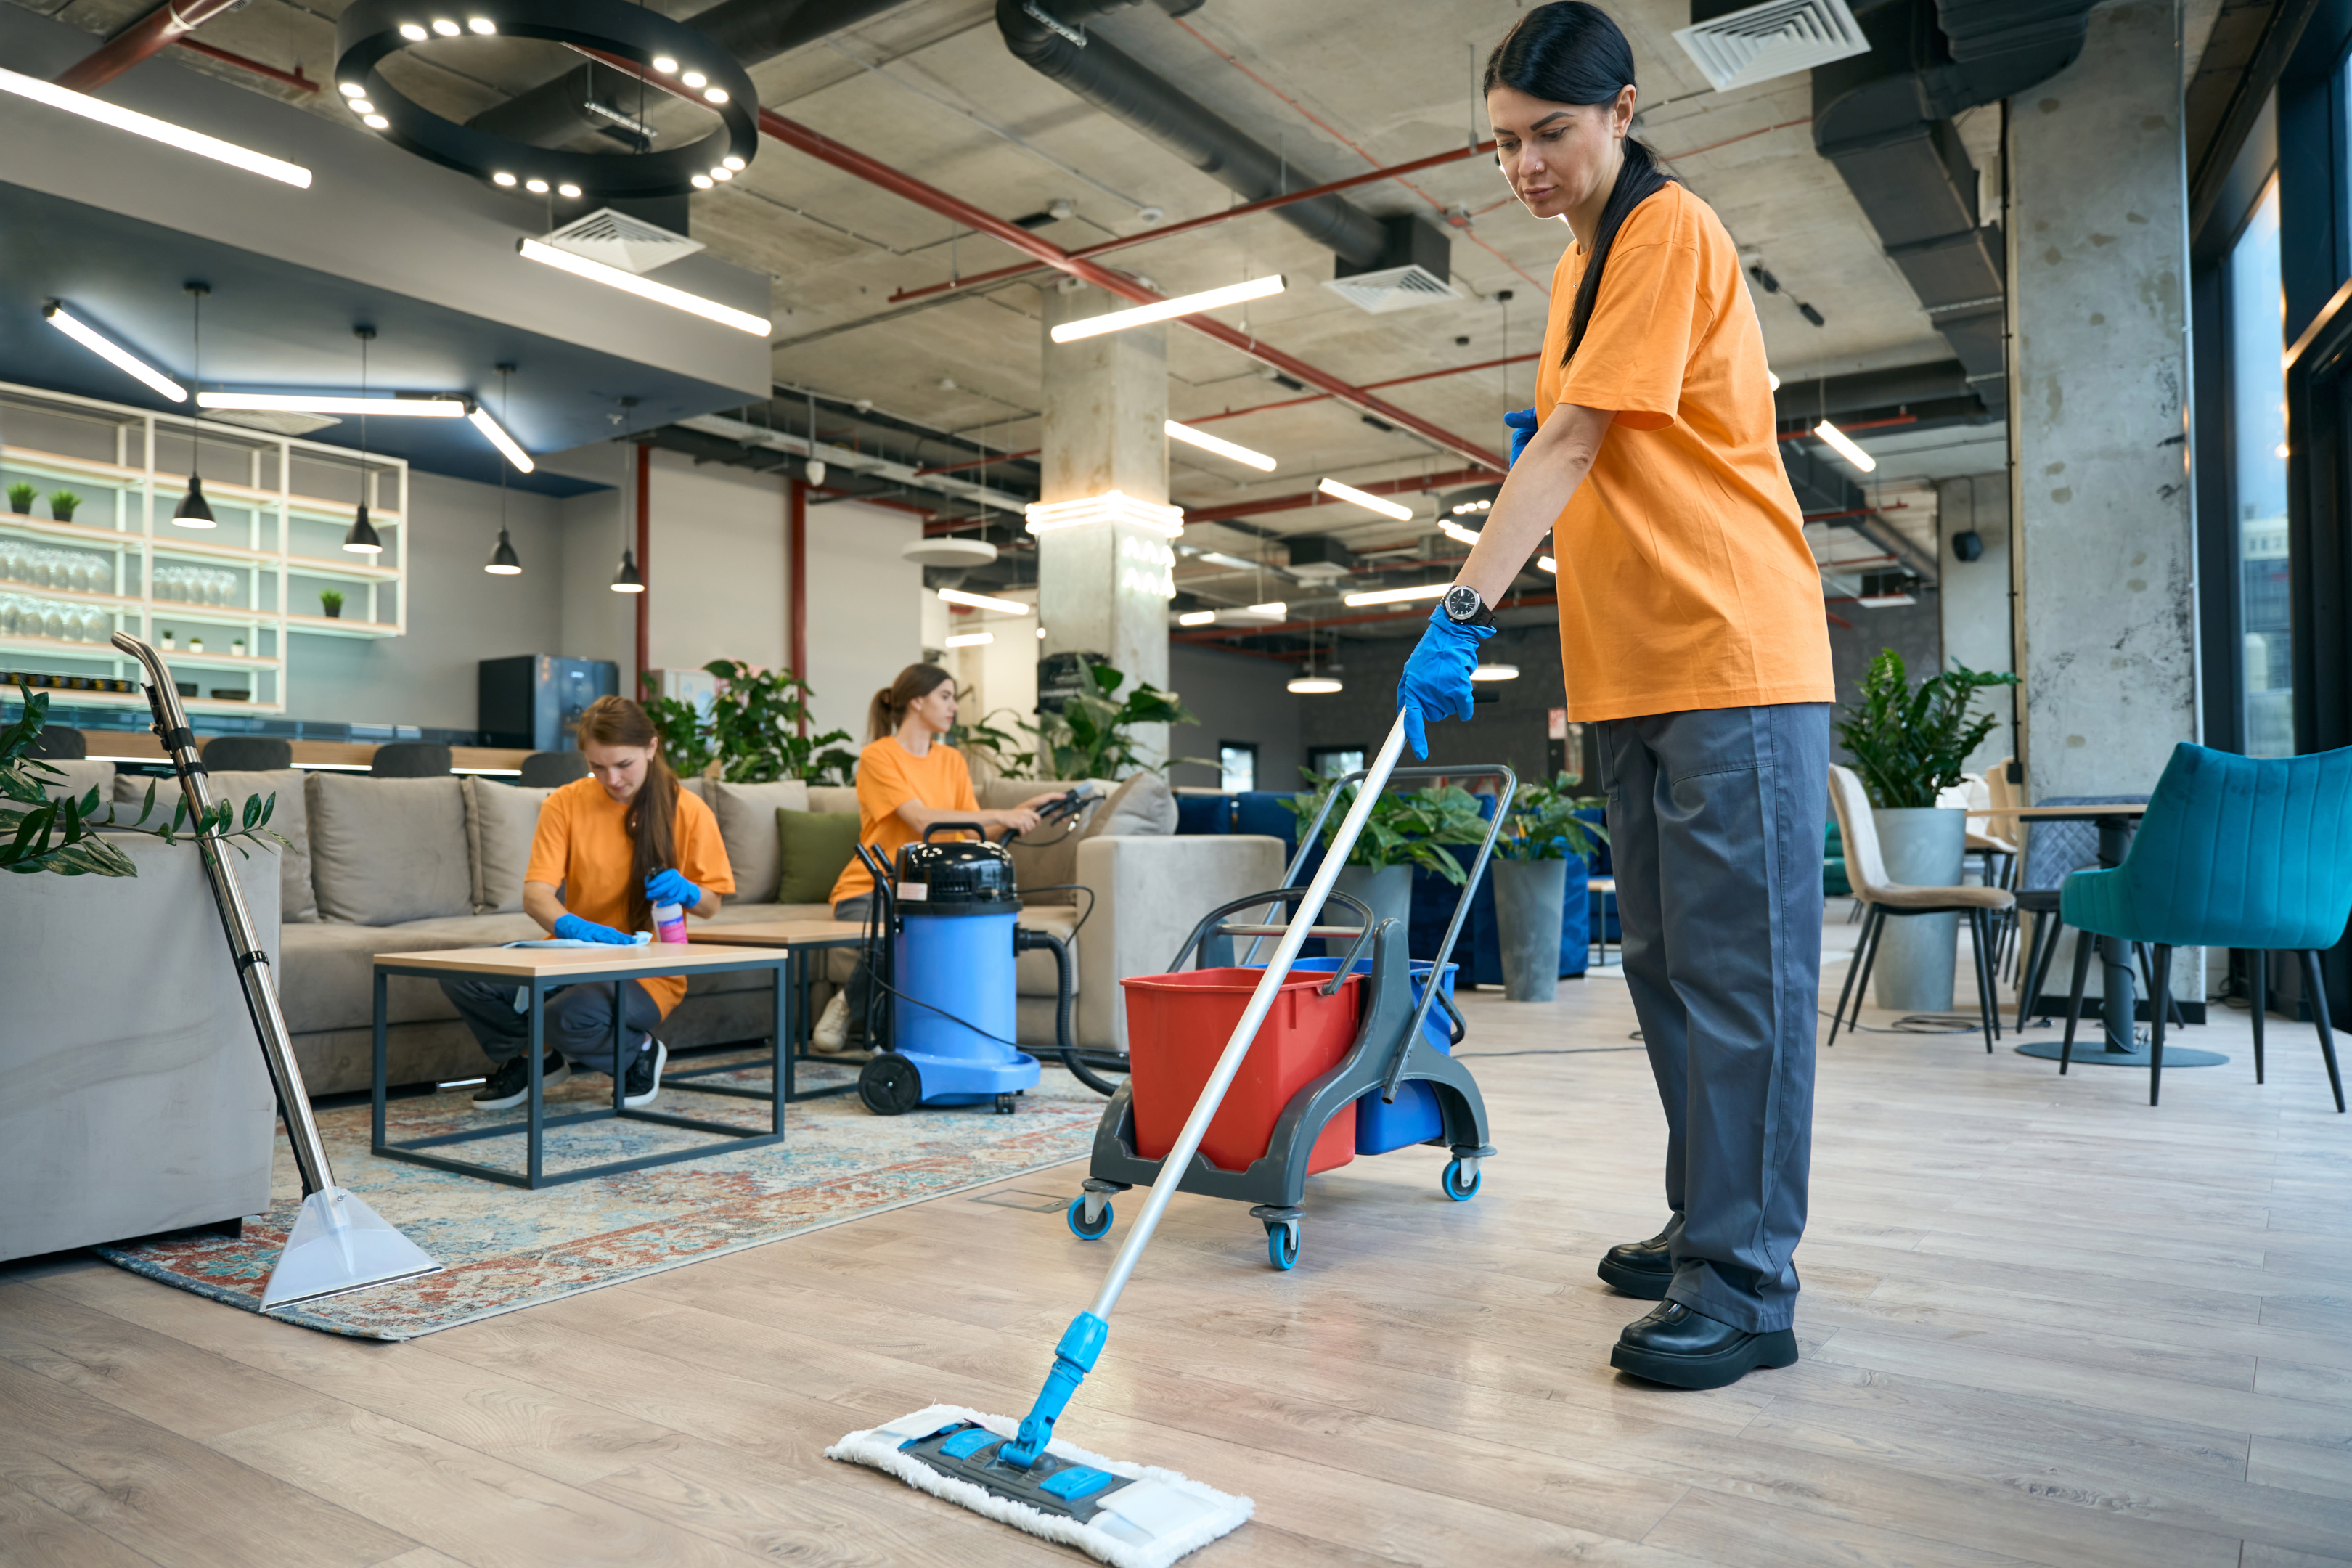 The cleaning service must be focused on the benefit of customers